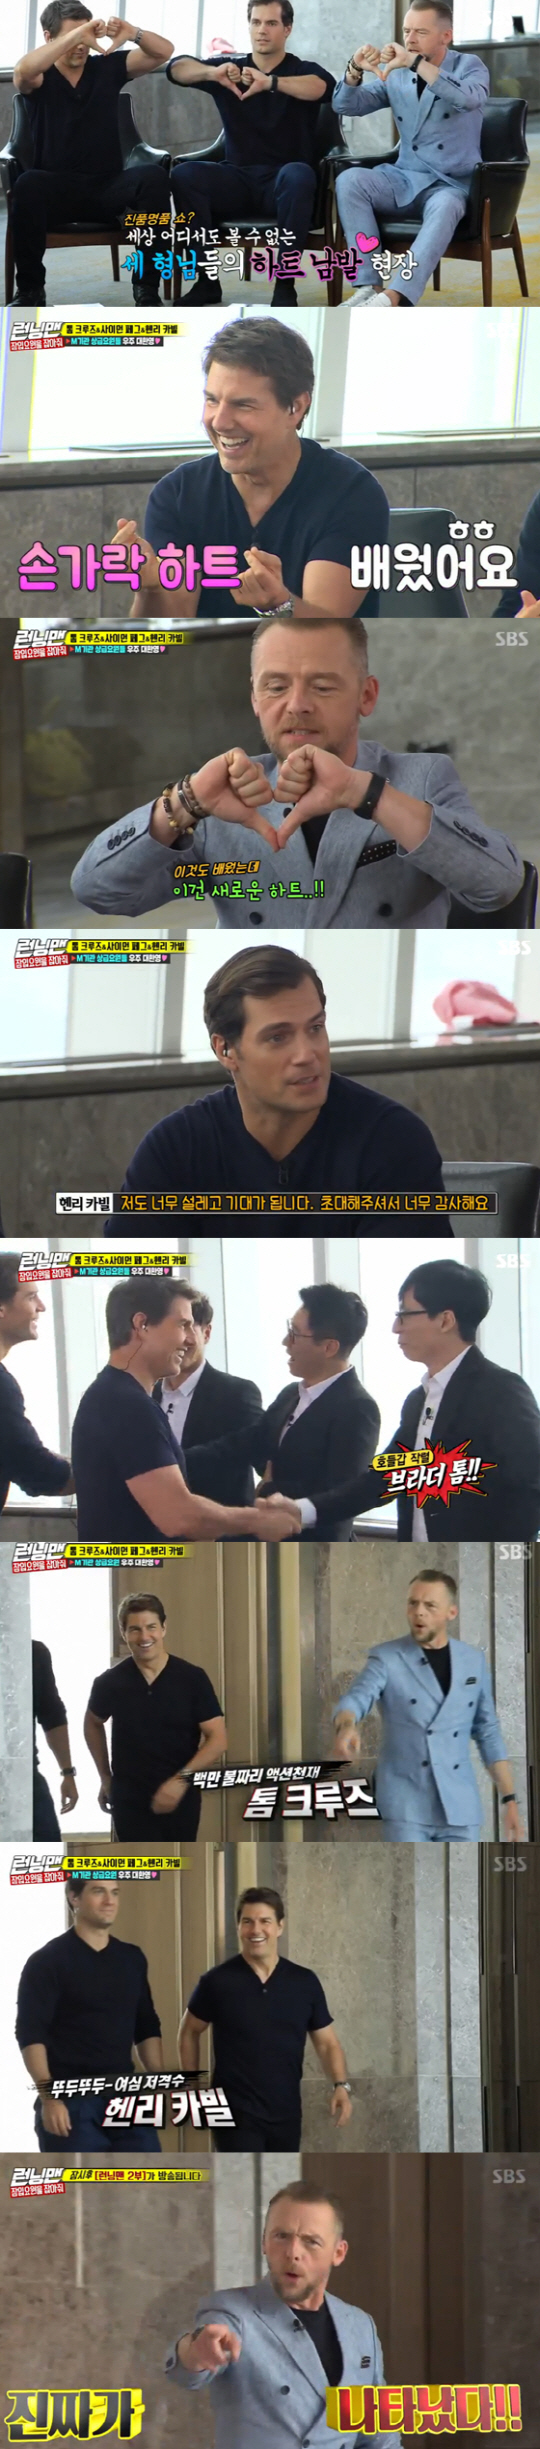 Tom Crew, Henry Carville and Simon Pegg are on the Running Man.On SBS Running Man broadcast on the 22nd, actors Tom Cruise, Henry Carville and Simon Pegg appeared in the movie Mission Impossible 6: Fallout.On this day, Yoo Jae-seok, Yang Se-chan and Jeon So-min had a secret meeting with the production team before the recording day.Three people were spies of the M agency to which Tom Cruise belongs.Yoo Jae-seok, Yang Se-chan, and Jeon So-min should find out the captain of R agency while hiding their identity.Hint acquisition The first round mission is ASMR breakfast. Mission to eat without exceeding 60dB.Kim Jong Kook and Song Ji Hyo were the top performers, and Song Ji Hyo got a hint that Infiltrator A is over 40.The second round group mission was a three-second single, and if eight people completed a sentence, the mission was successful. However, the statue failed to pay the hints.In the third round timeout shooting mission, Jeon So-min got a hint about Captain R. R. Ji Seok-jin, Song Ji-hyo, Haha, and Kim Jong-guk.The final mission is that if three senior agents win the showdown, the infiltrators will get a hint of R captain. On the contrary, if the senior officer loses, the hints of the infiltrators will be paid to the R agents.And finally Tom Cruise, Henry Carville, and Simon Pegg appeared.Tom Cruise said, It is a good show, and I am so glad to be on this show. It is my ninth visit to Korea, and every time I come to Korea, I am so excited and good.Henry Carville said, I am going to visit Korea for the first time. I am so excited and excited. Thank you for inviting me.Simon Pegg said, This is my second visit to Korea. I am enjoying this time too much. I learned to mark hearts.First, Simon Peg and Lee Kwang-soo conducted an iron bag quiz, and Simon Peg showed concentration and hit broccoli.Henry Carville and Tom Cruise also won the game, matching whistles and matches, and Simon Pegg laughed with a special sense of entertainment.Tom Cruise, Henry Carville and Simon Pegg then had a good time together with the box mission and the Tong-Ajeos game.Finally, the three were presented with a signature of Running Man: The Namemark.It was so fun - you guys are great, Tom Cruise said.Thank you, it was so fun playing games, it was also so good to be on these shows, Henry Carville then revealed.Simon Pegg said, It was really fun, he said. I am so happy, but I think its probably because we won a lot.After that, Yoo Jae-seok and Jeon So-min were on the final decision. In particular, the spy agents pointed to Haha as R-captain, but the actual R-captain was Song Ji-hyo.The final victory was won by the R agency.